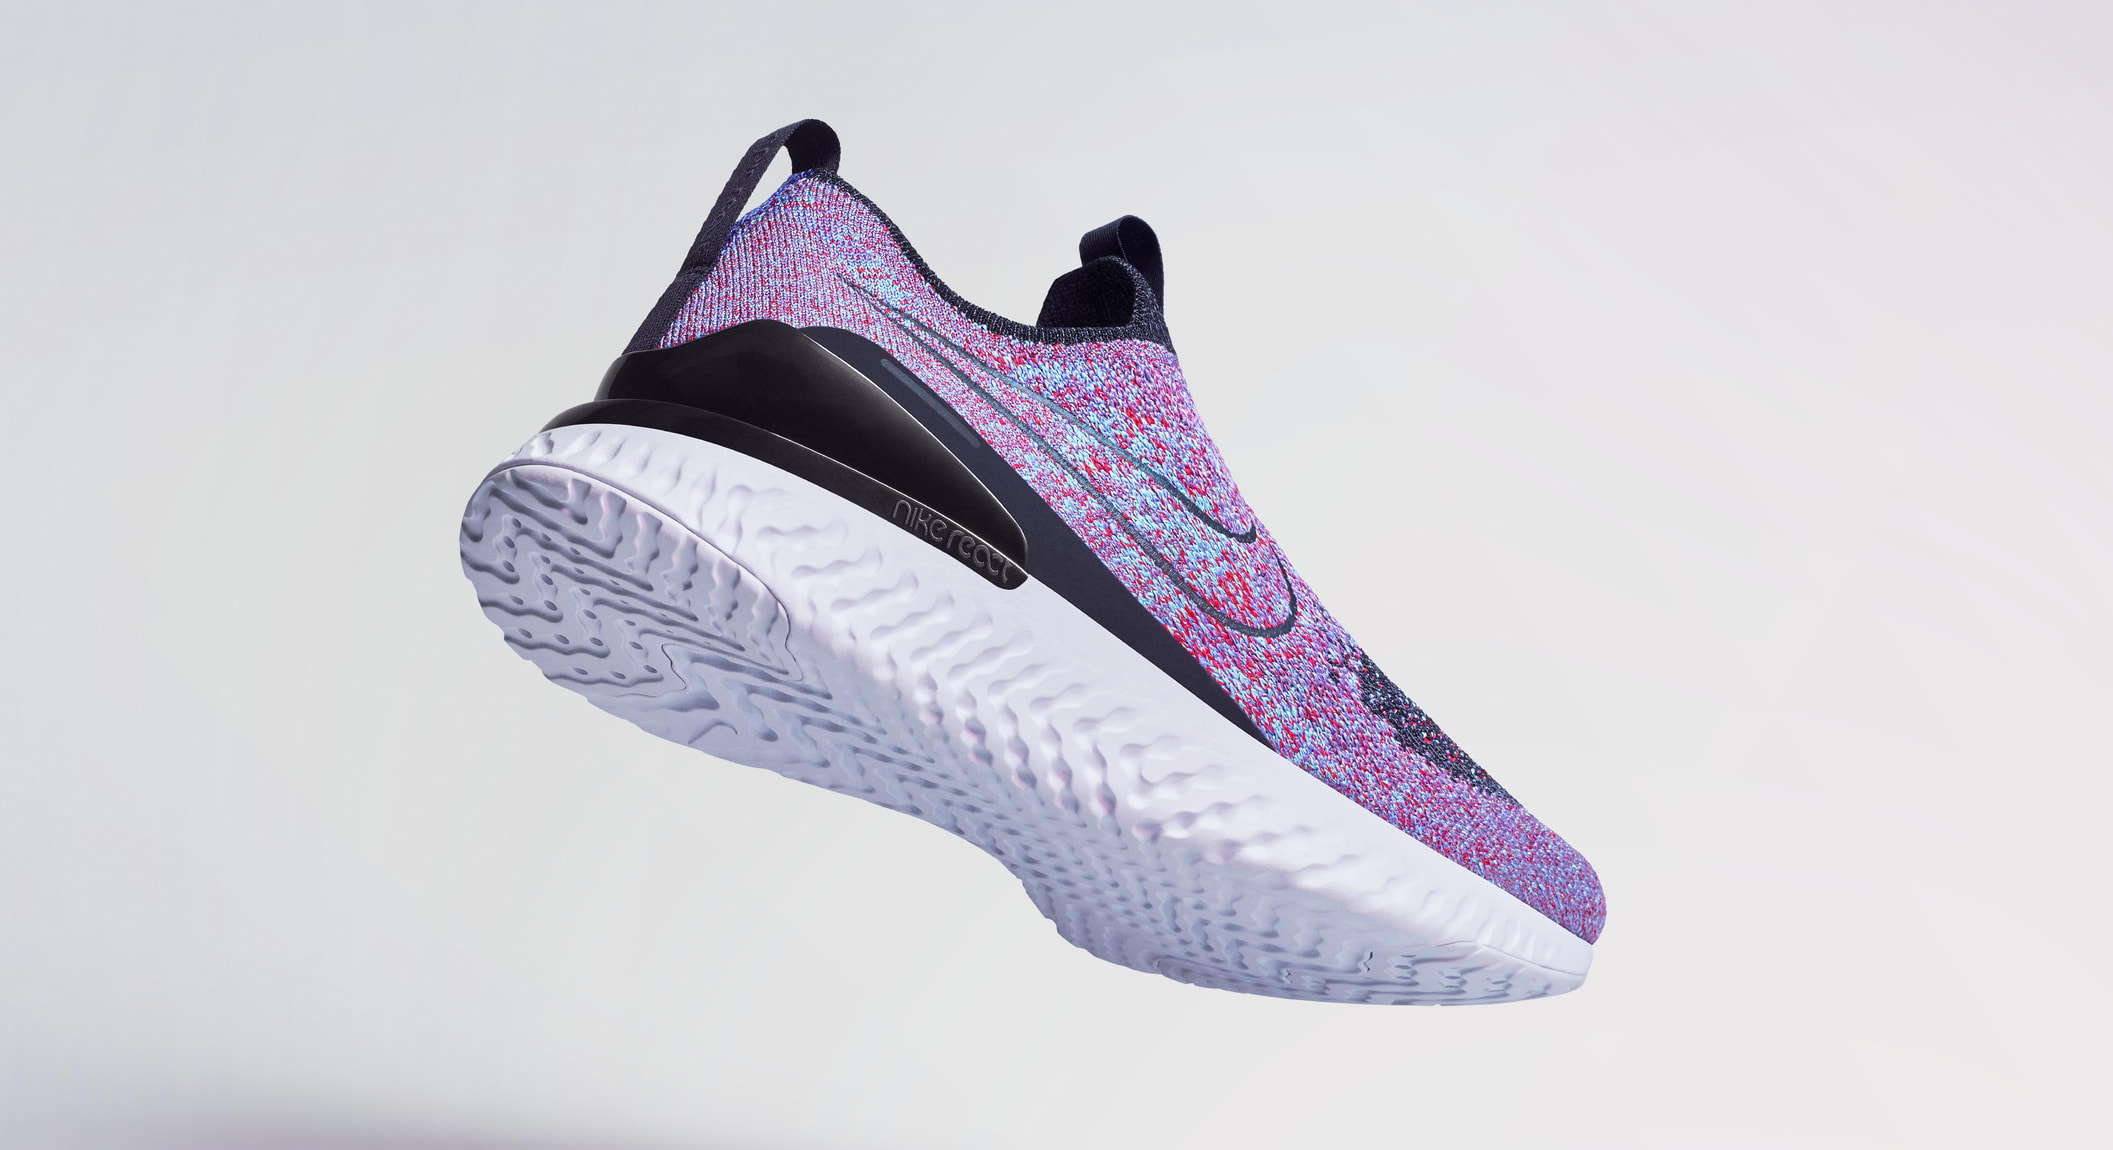 Nike Phantom React Flyknit Unveiled: Official Images and Release Info